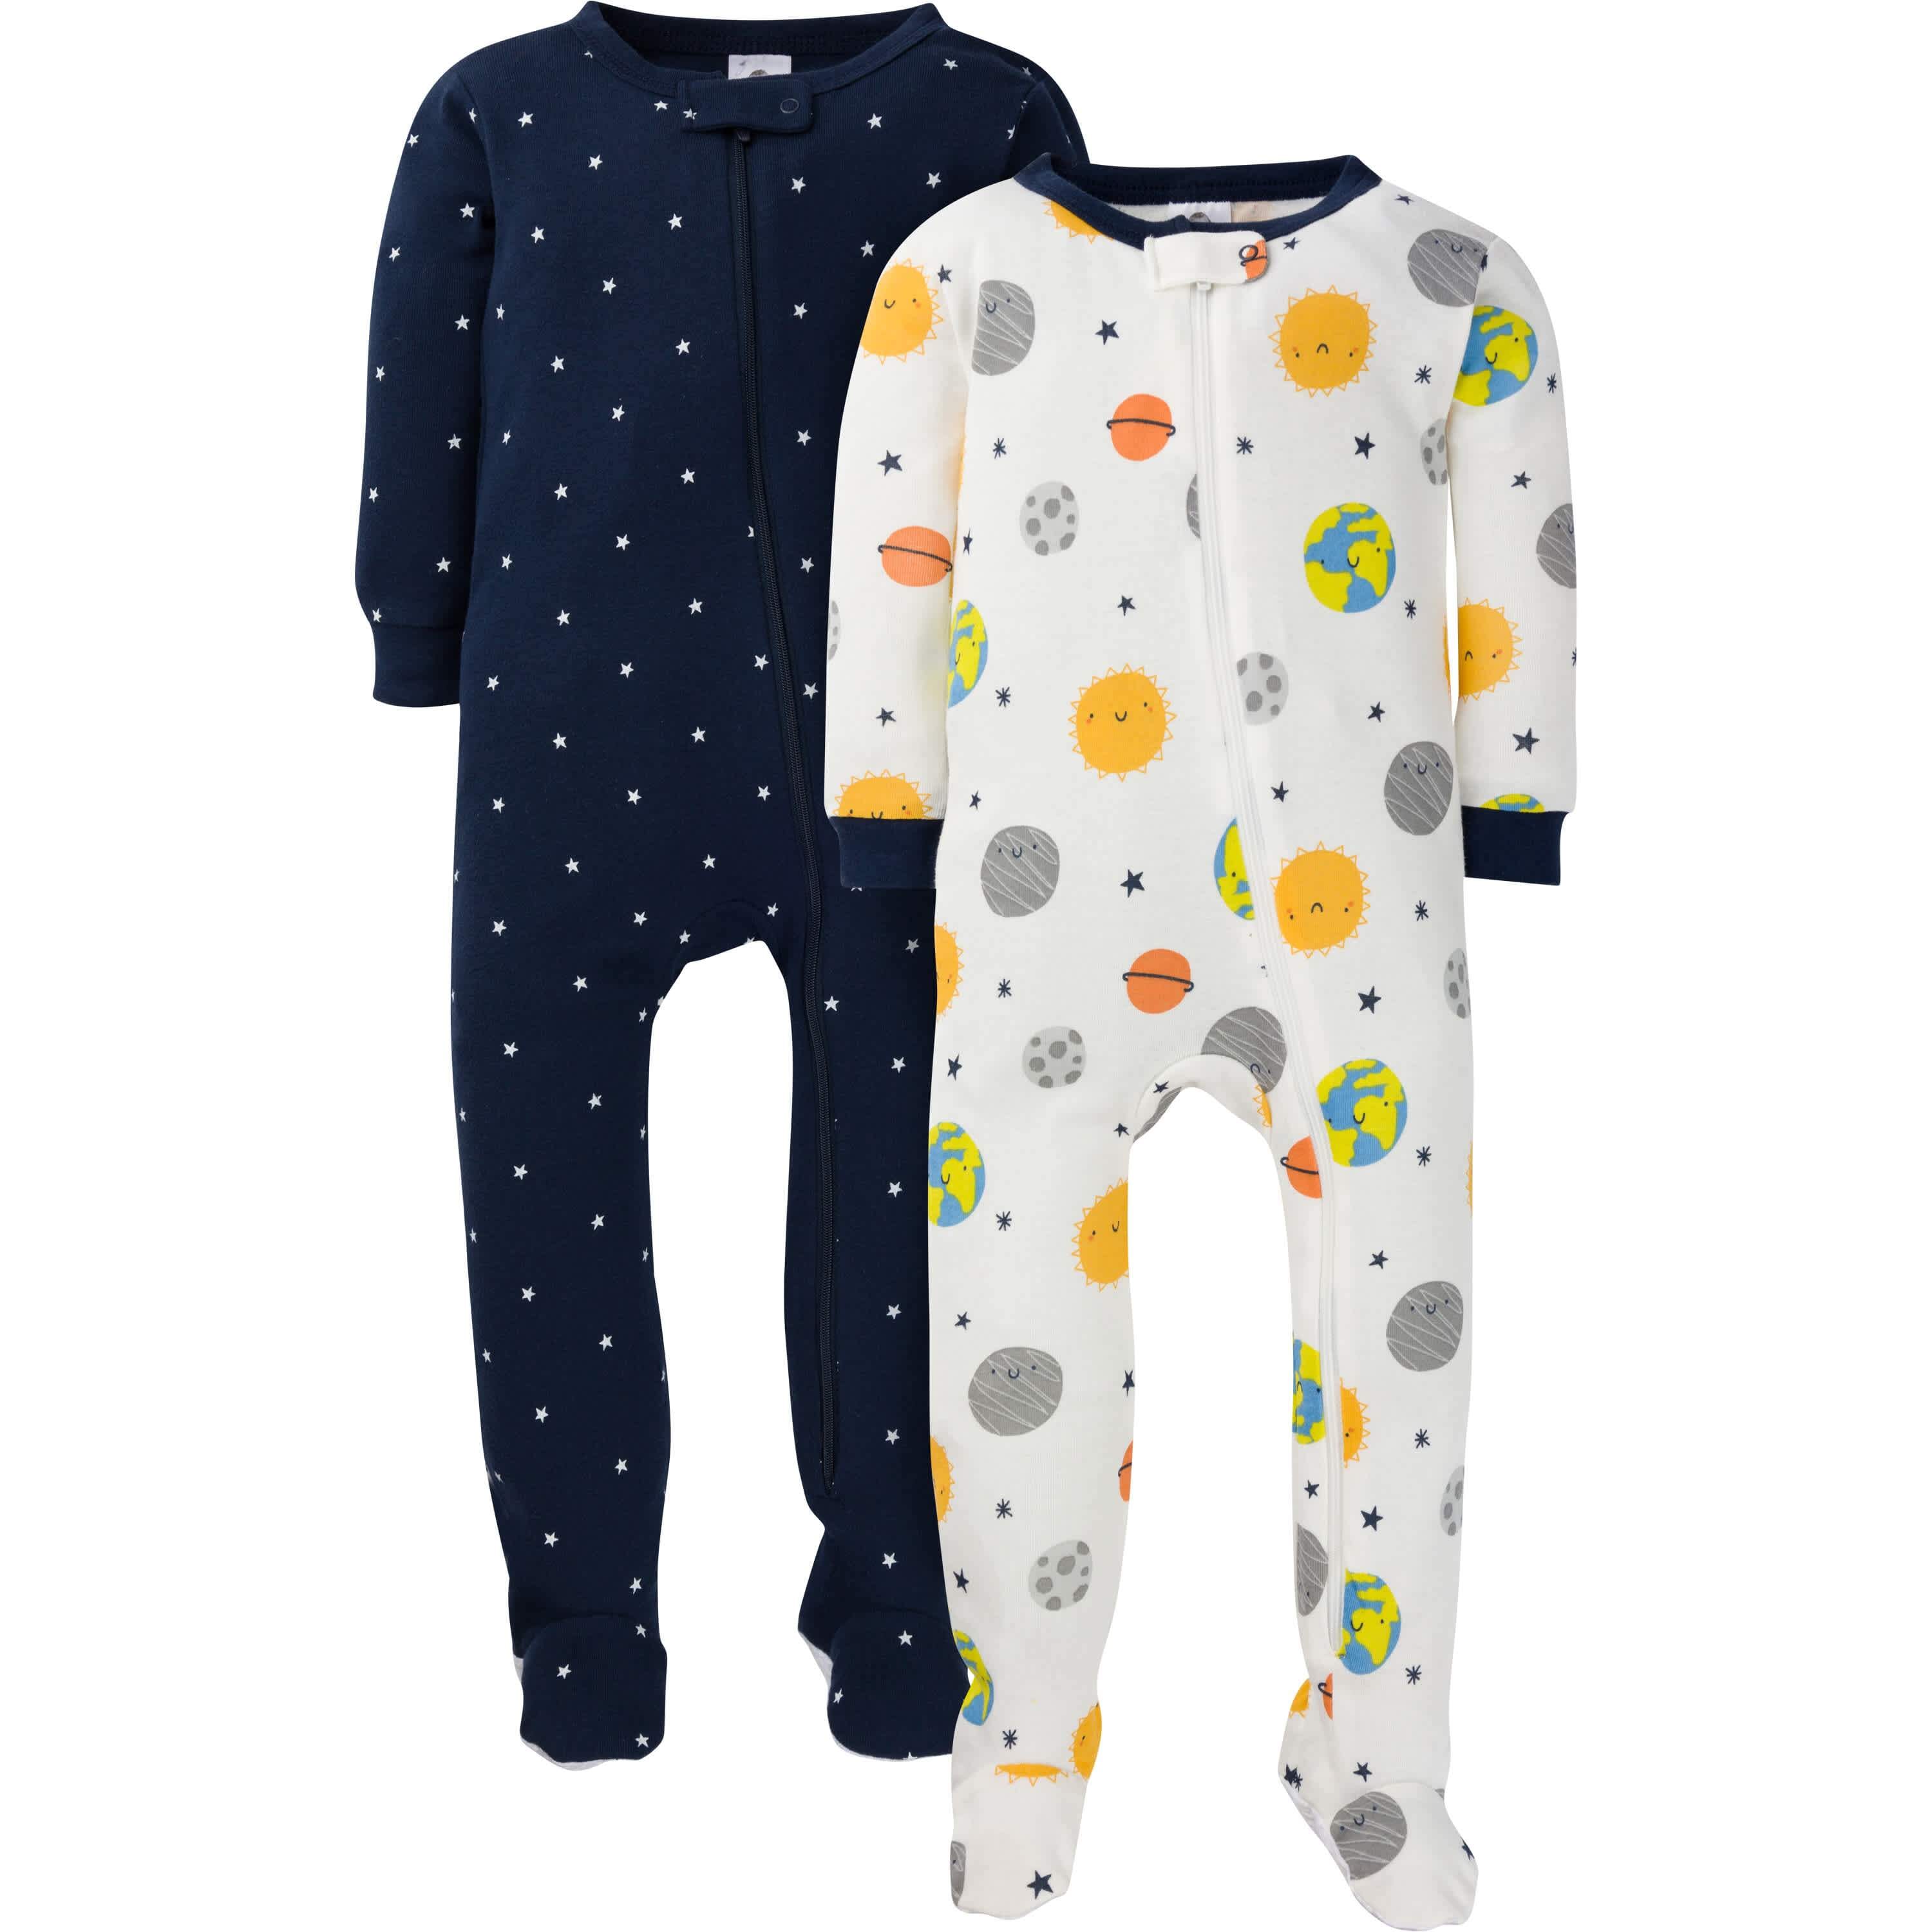 2-Pack Baby & Toddler Boys Earth Snug Fit Footed Cotton Pajamas